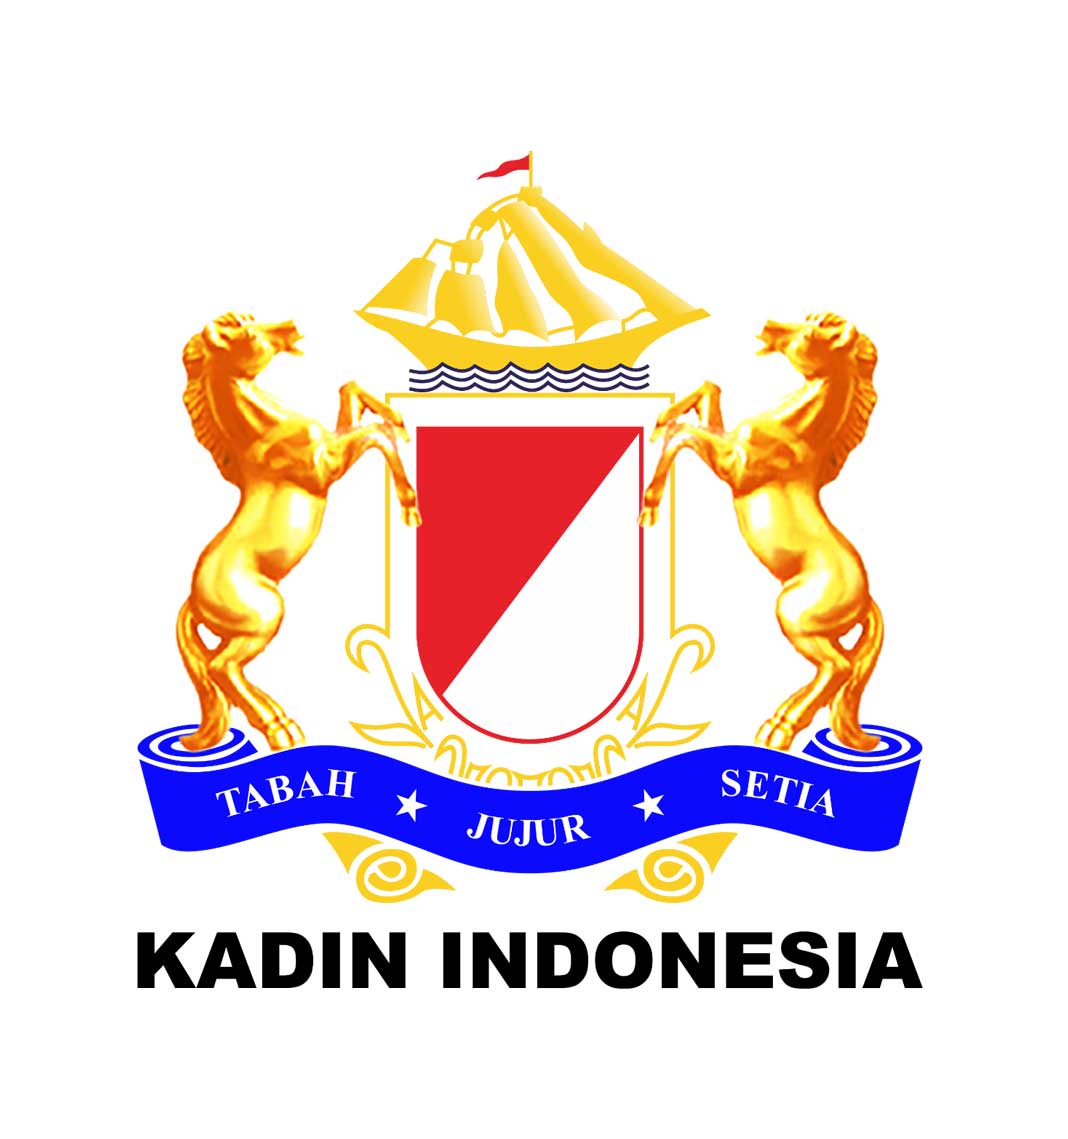 KADIN Indonesia And Western Australia Join Forces To Develop Critical Minerals For The Global Battery And Electric Vehicle Industry